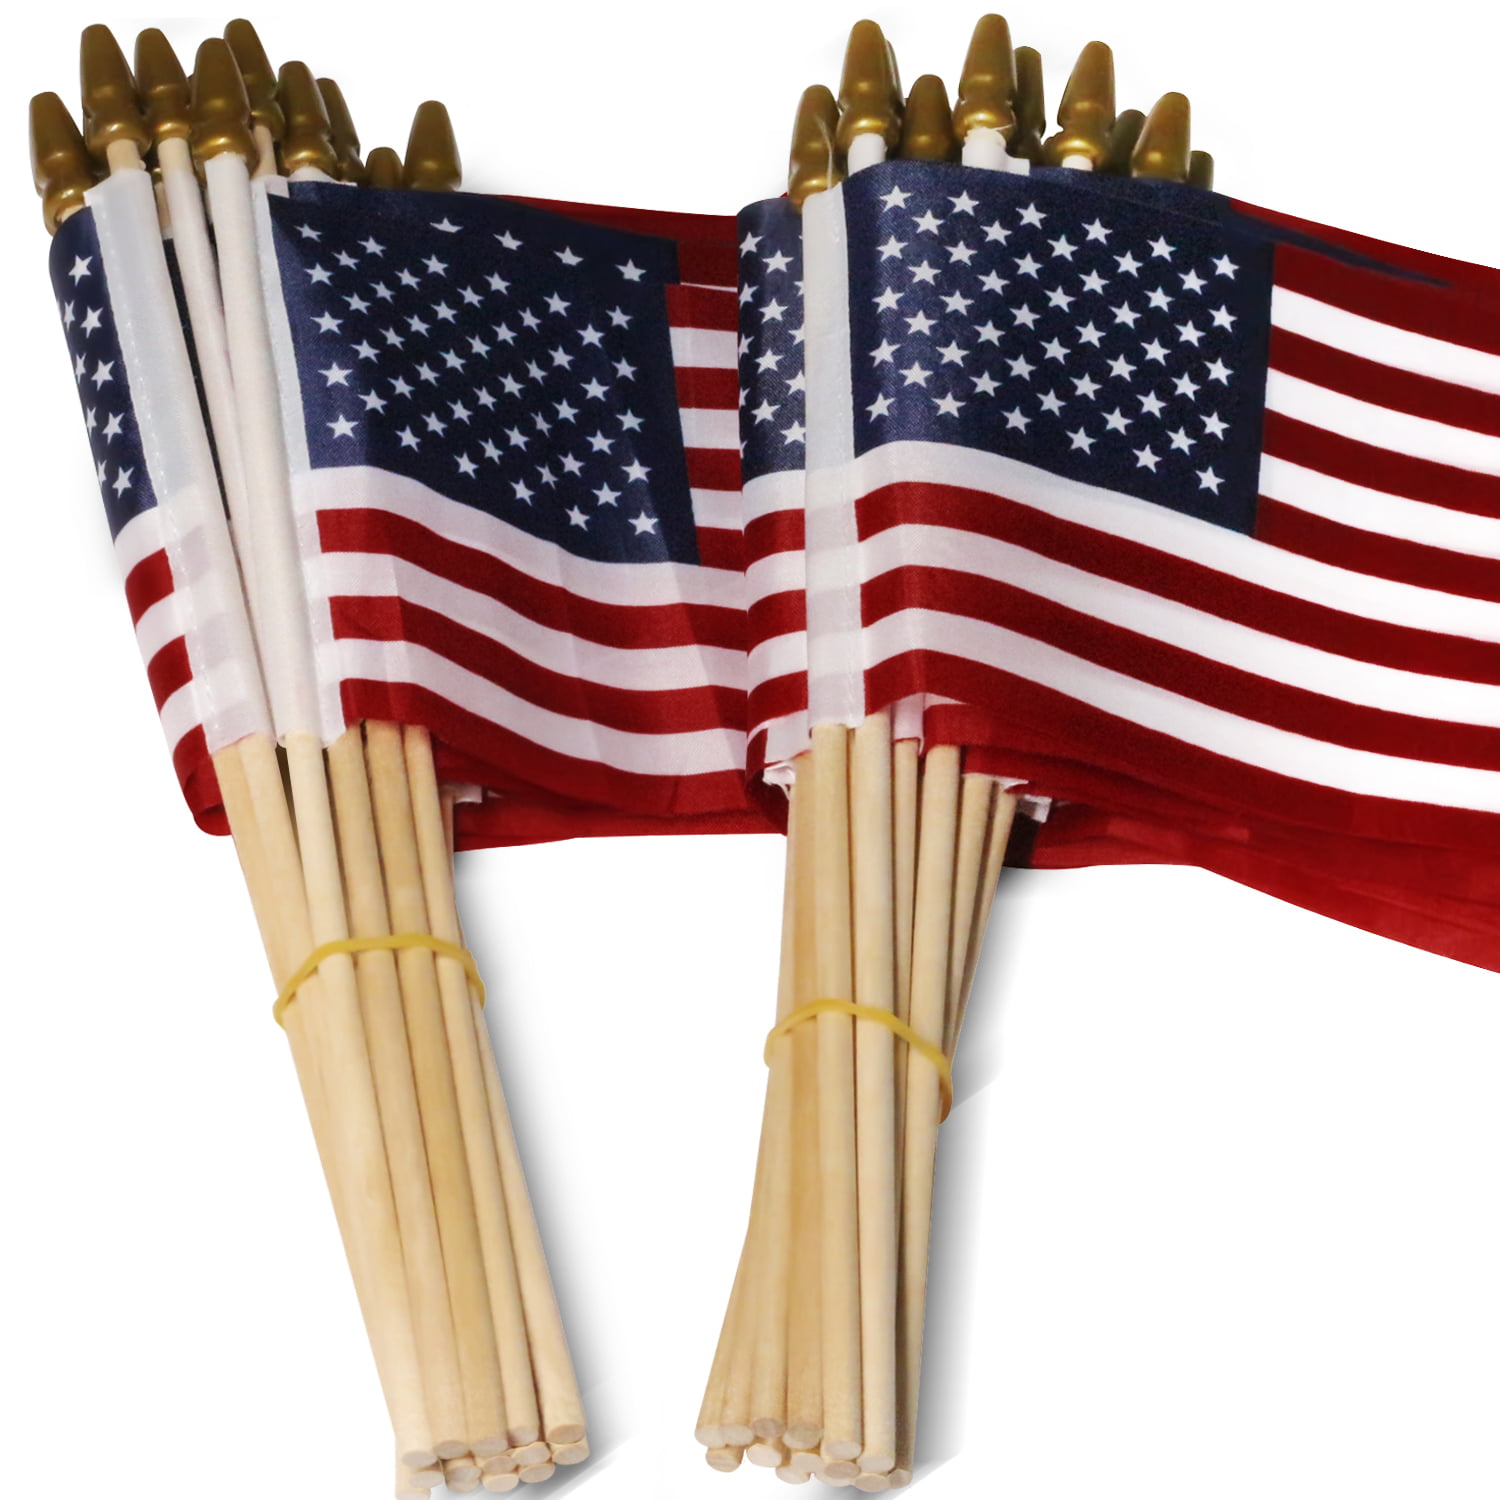 American Hand Held Stick Flags Spear Top Lapogy Small/Mini American Flags on Stick 5x8 Inch Handheld American Flags US Flags 4th of july decor Veteran Party 12p Parades patriotic Decorations